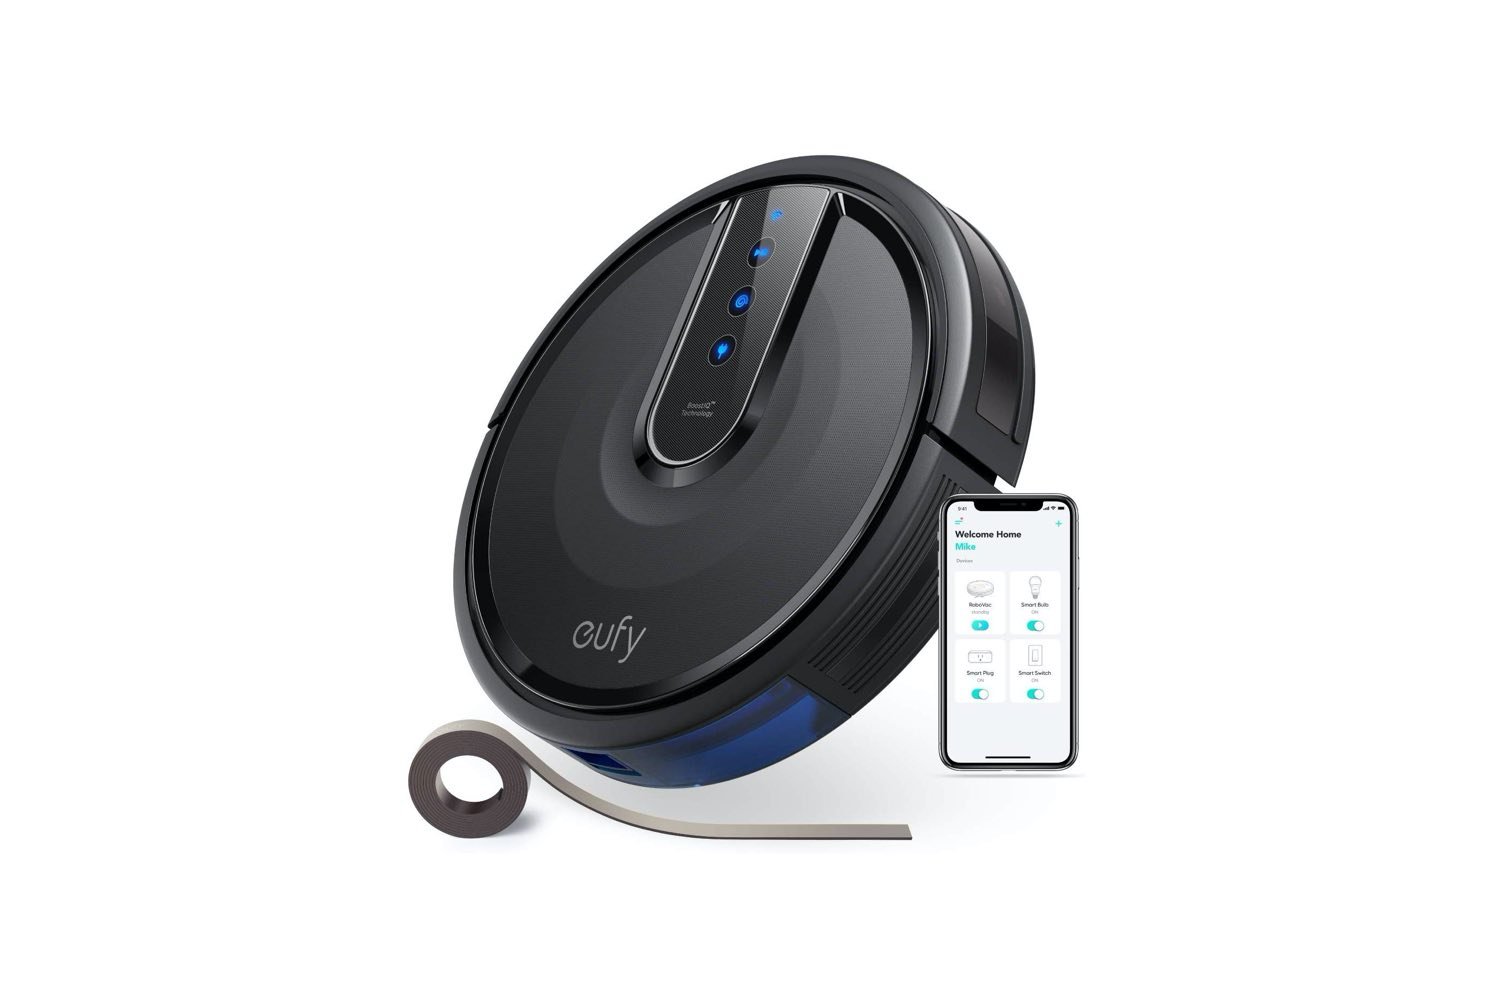 Usually $290, The eufy RoboVac 35C Robotic Vacuum Cleaner Available On Amazon For $199 